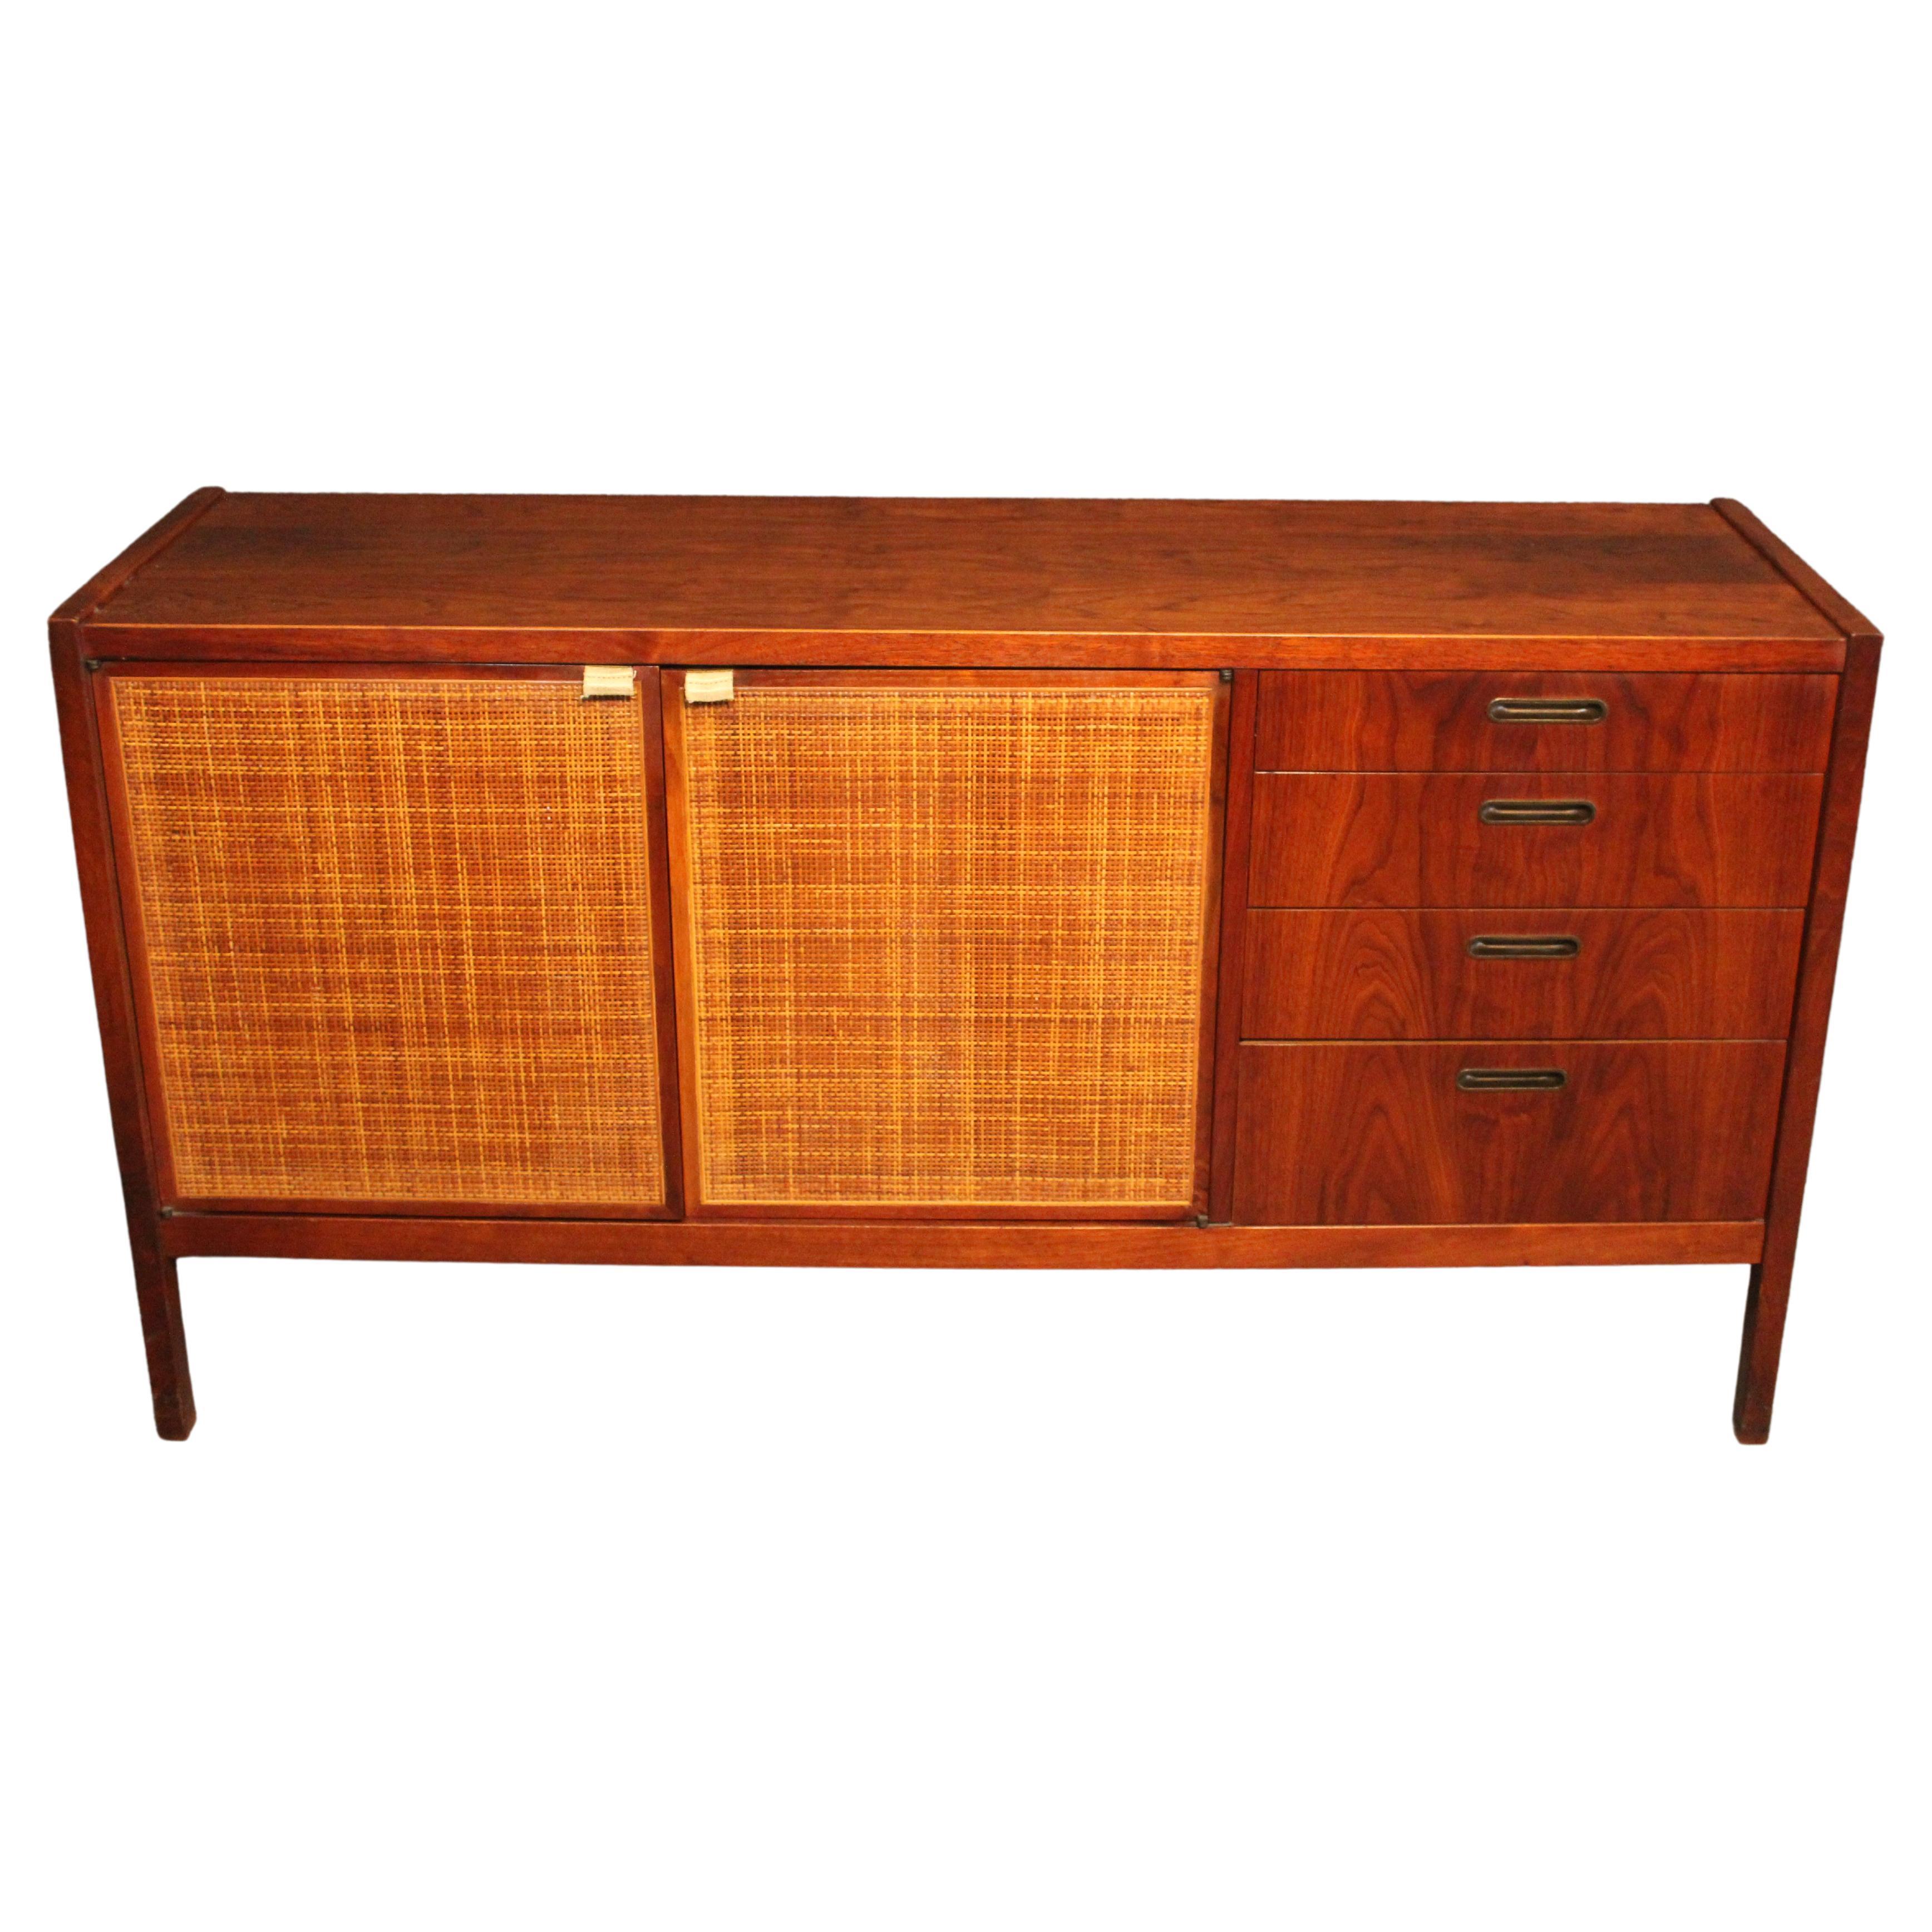 Jack Cartwright Caned Door Sideboard by Founders